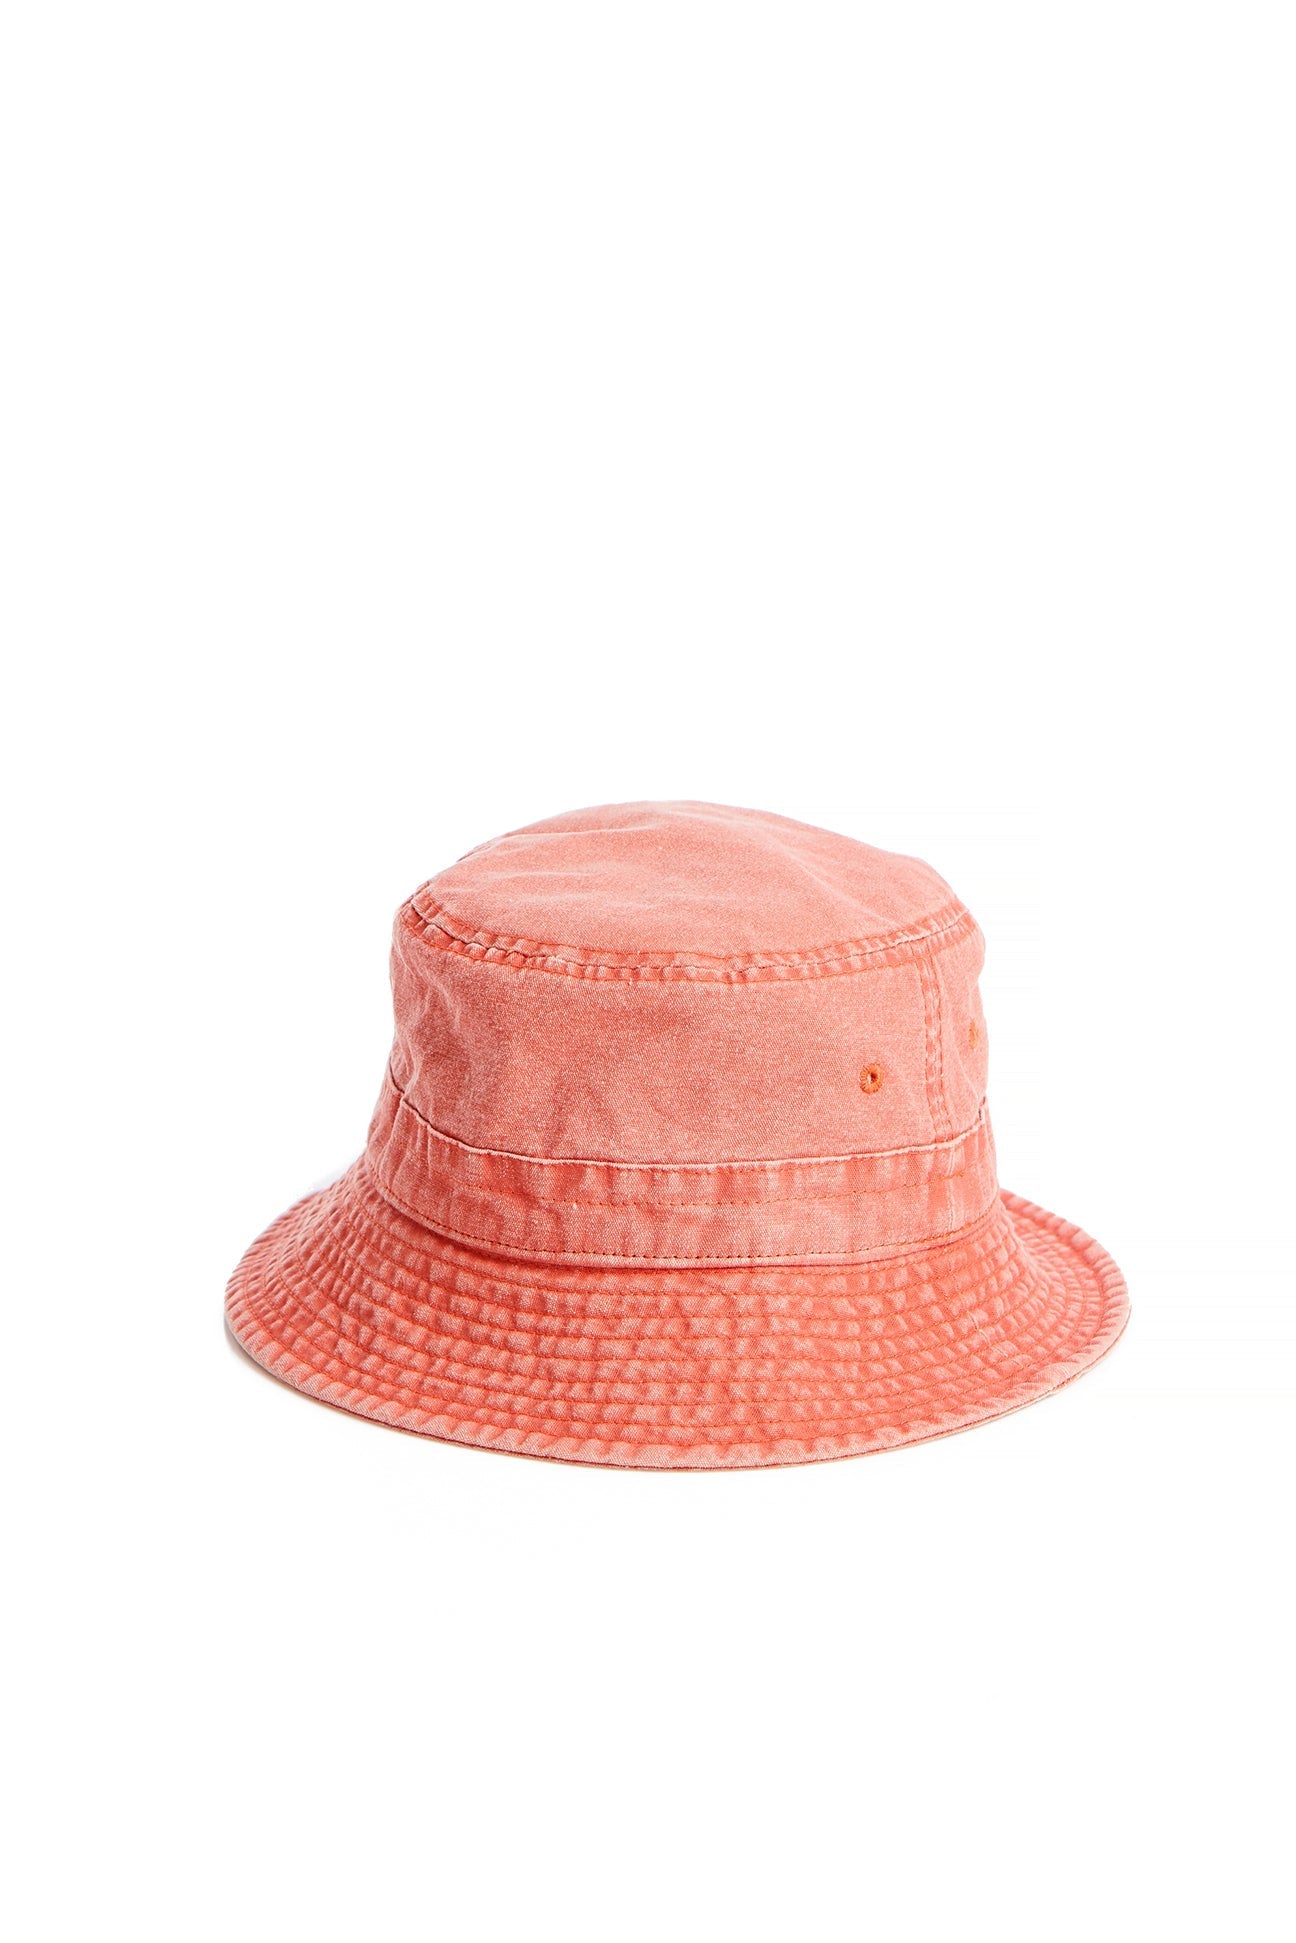 Murray's Toggery Shop Nantucket Red Bucket Hat MENS ACCESSORIES Nantucket Reds